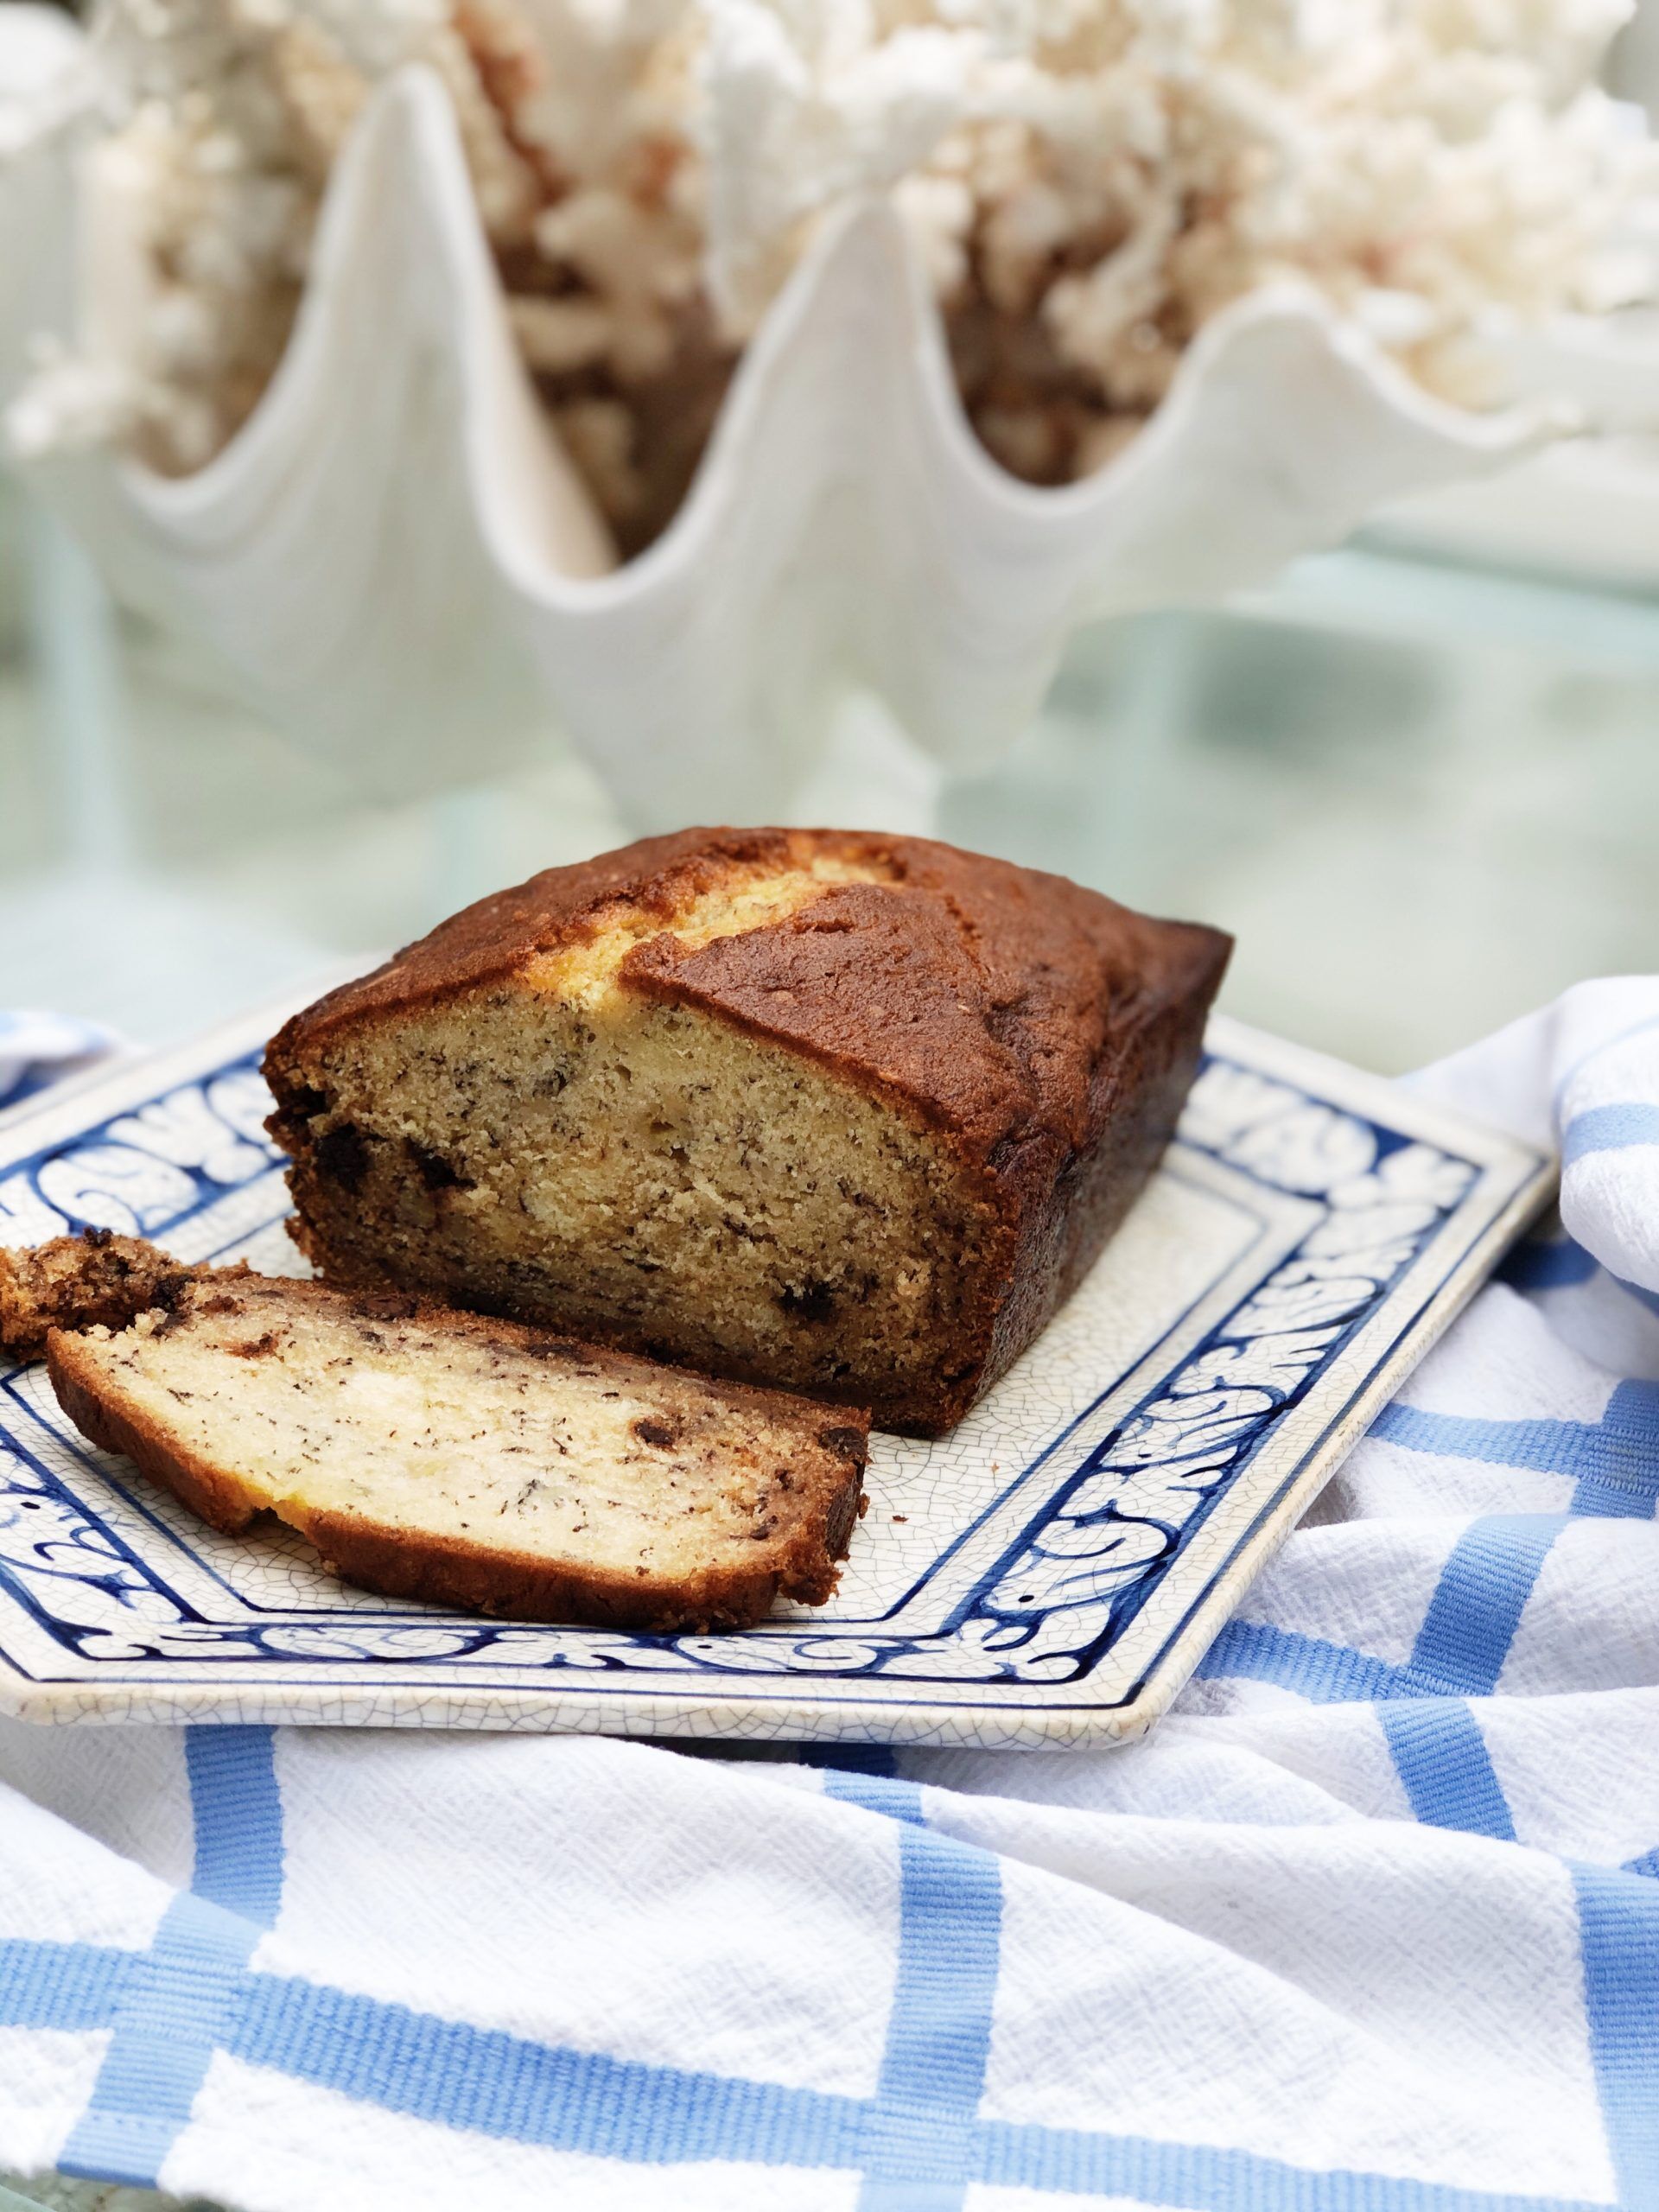 Do you have a few overripe bananas sitting on your counter? Here are our favorite Banana Bread recipes...with or without nuts or chocolate chips.